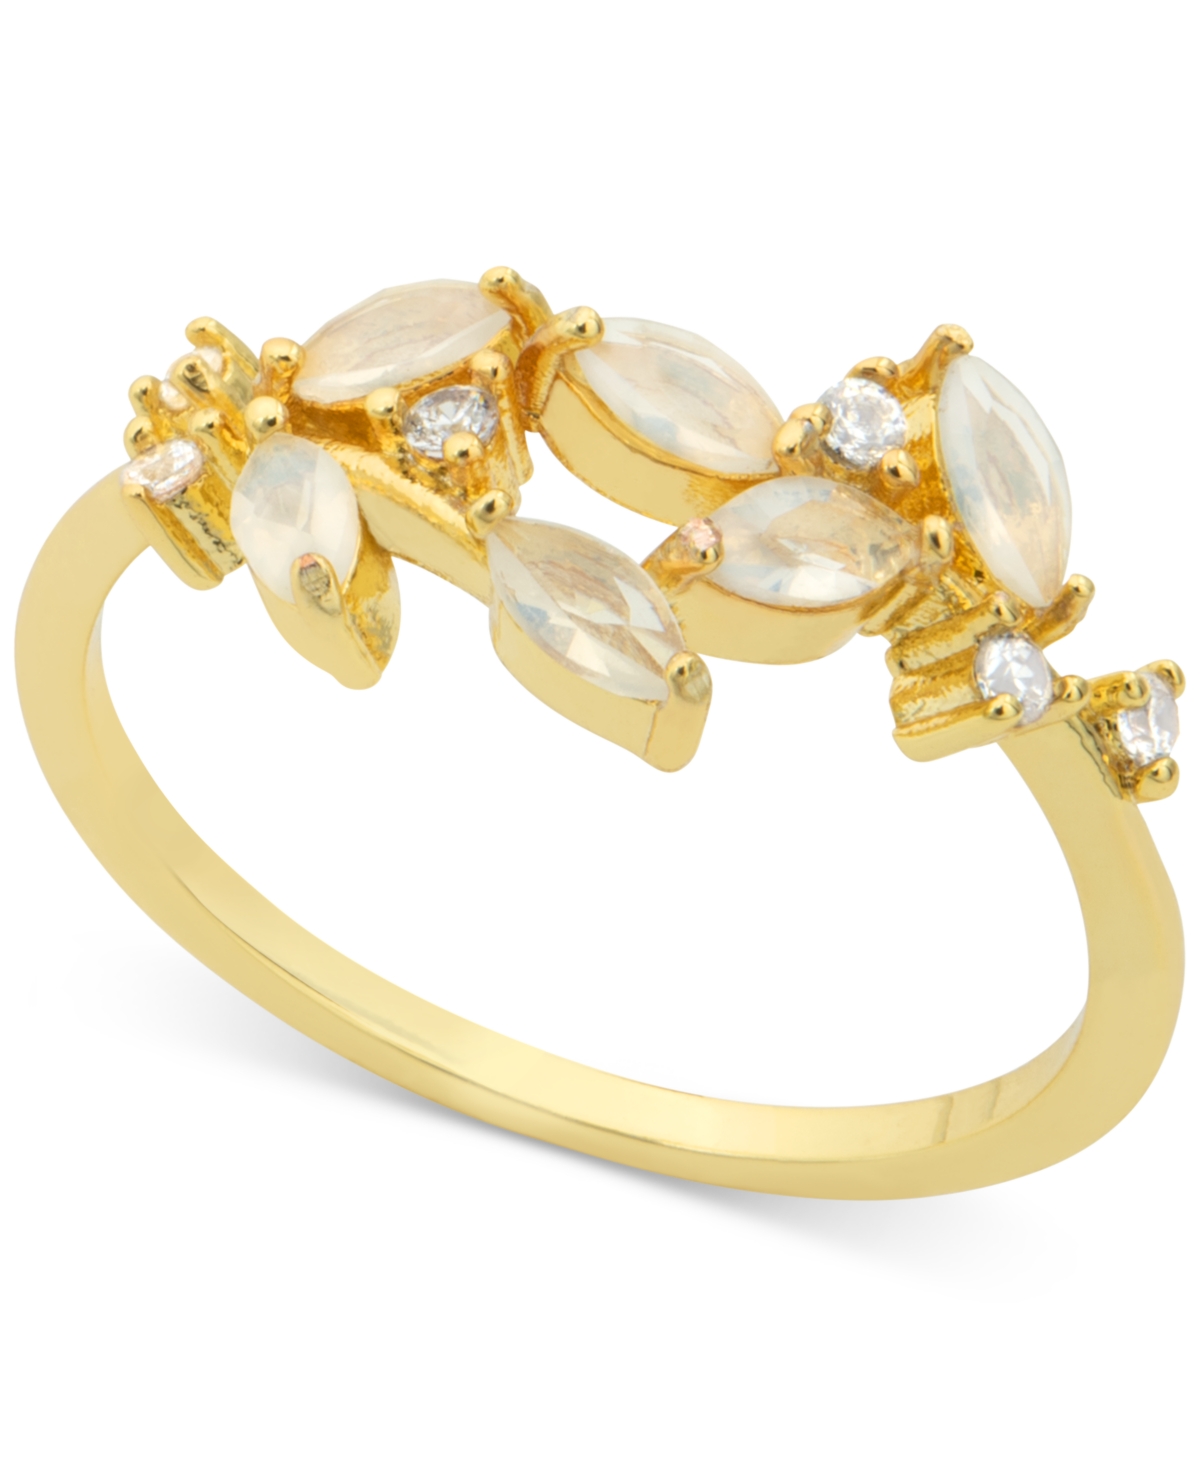 Gold-Tone Crystal Flower Sprig Ring, Created for Macy's - Gold